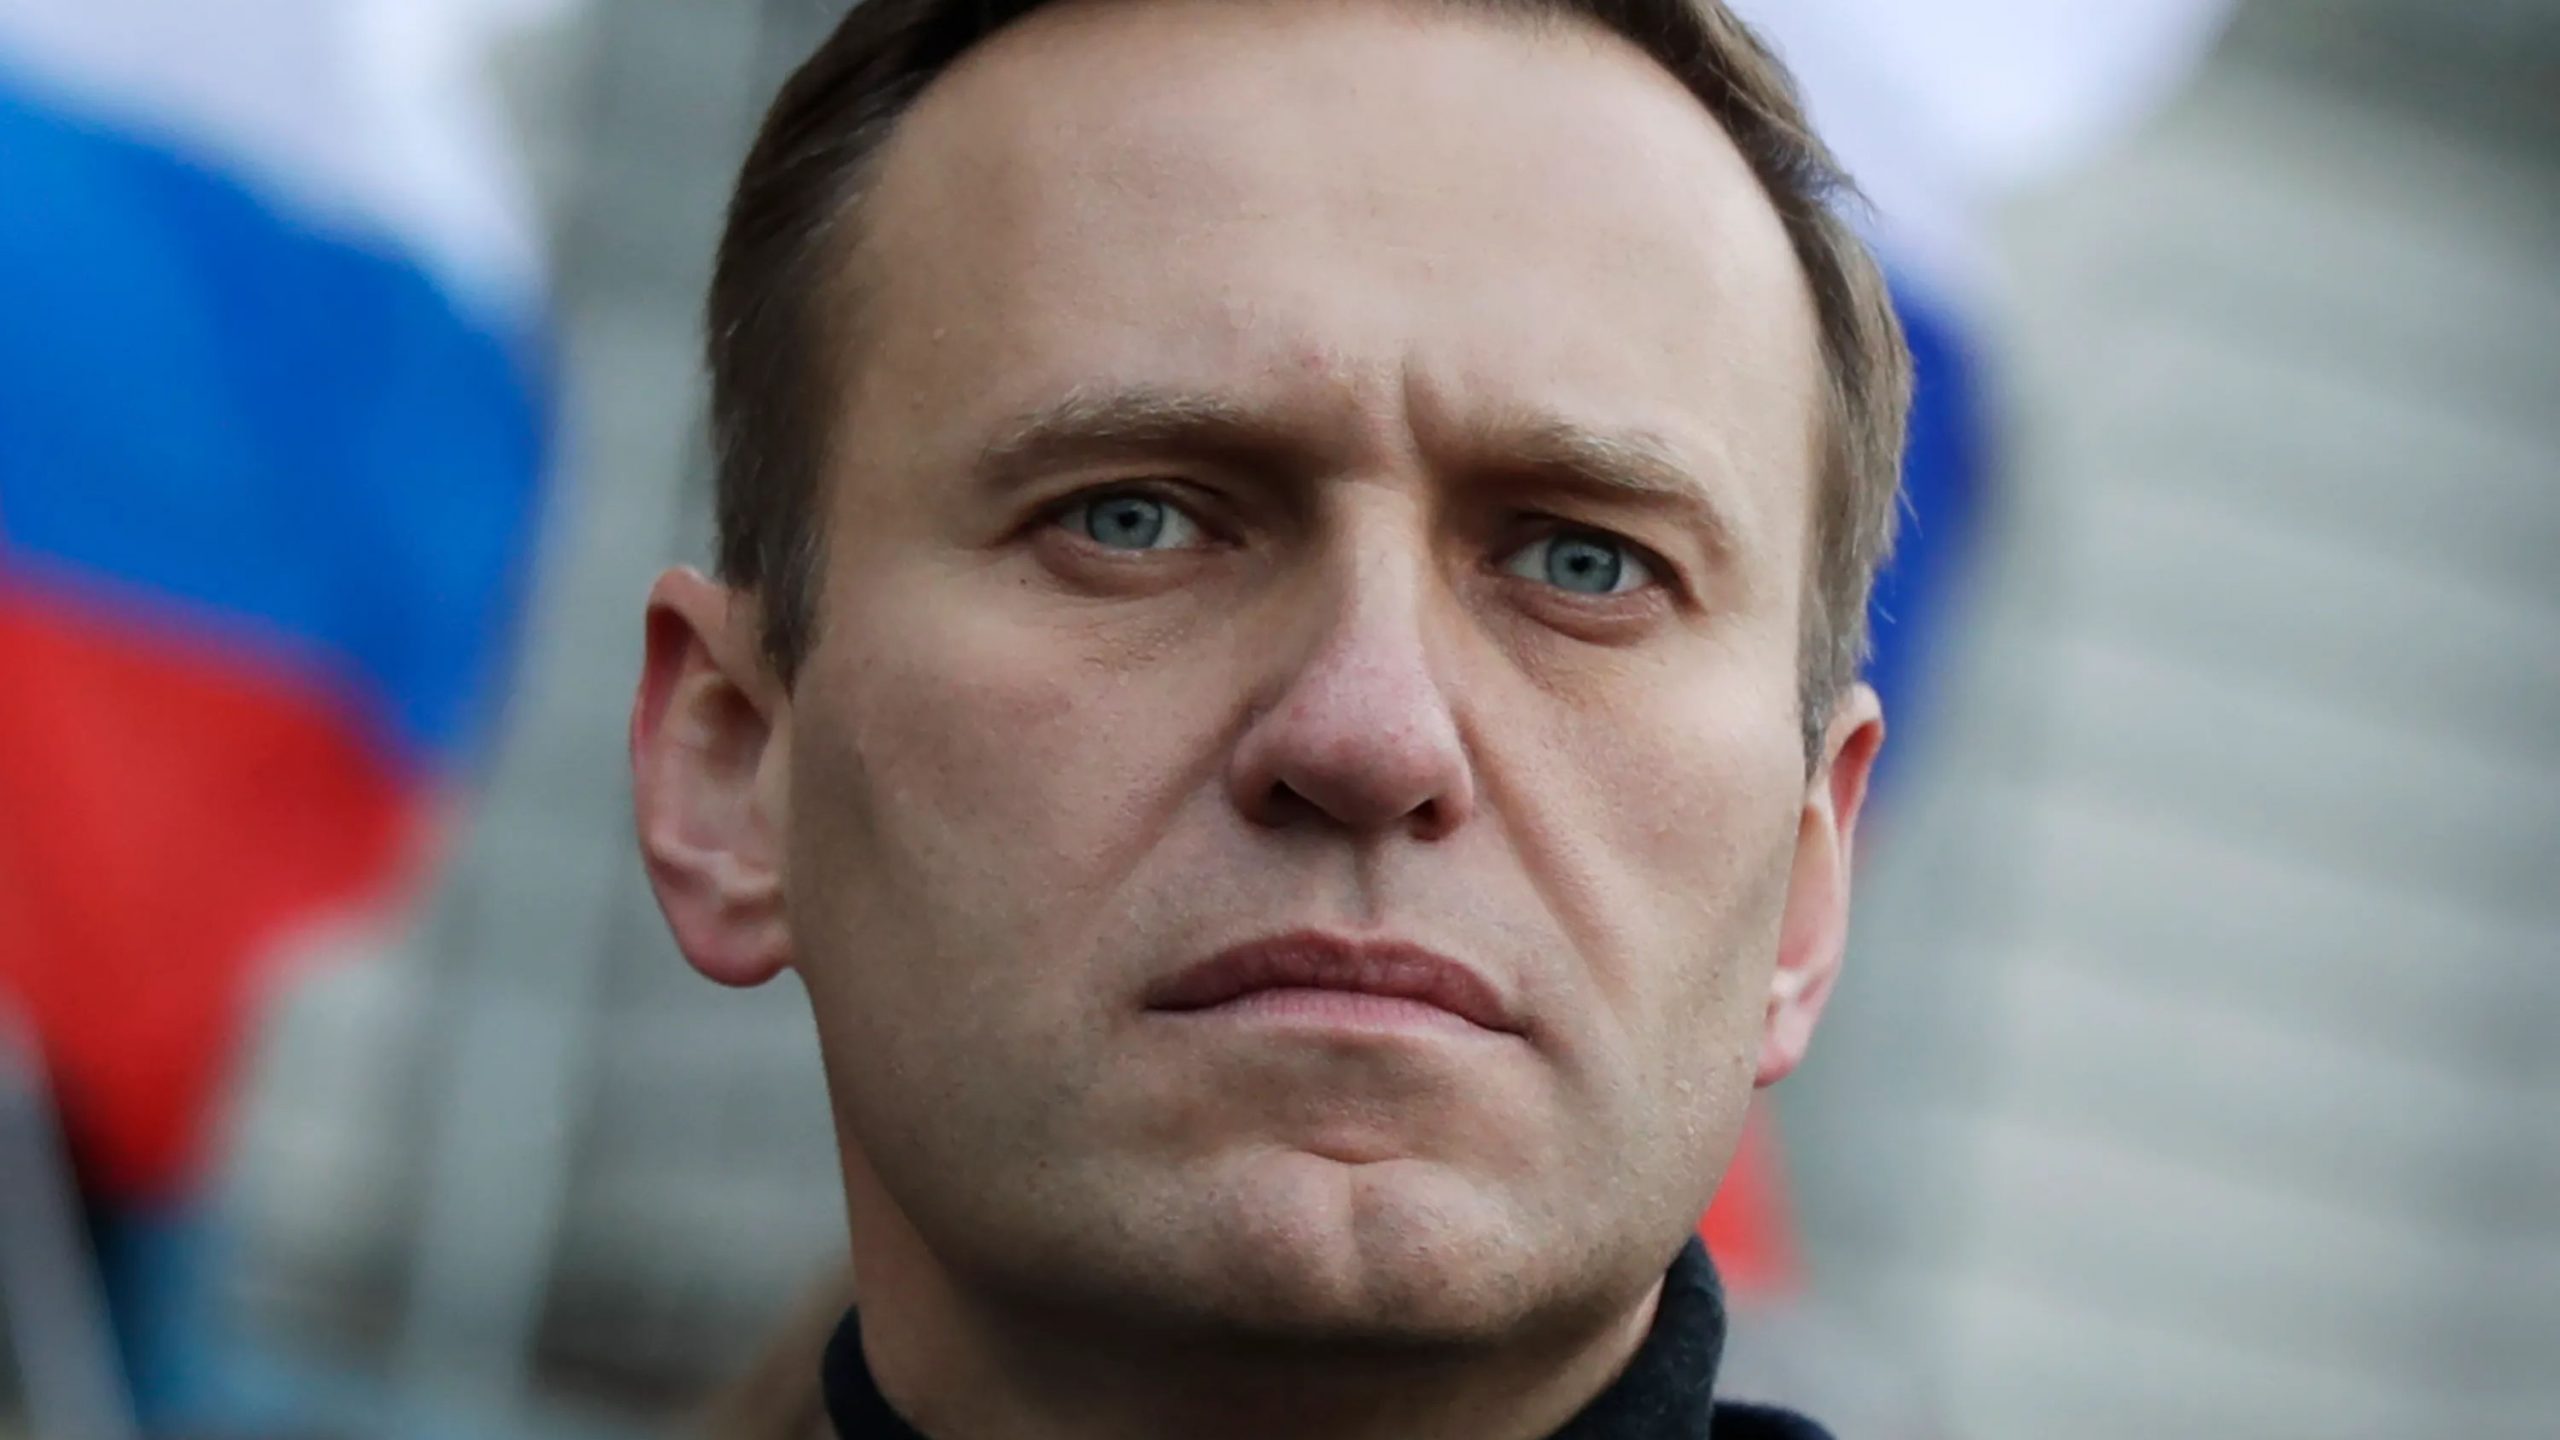 Russian opposition leader Alexei Navalny says Novichok found ‘in and on’ his body